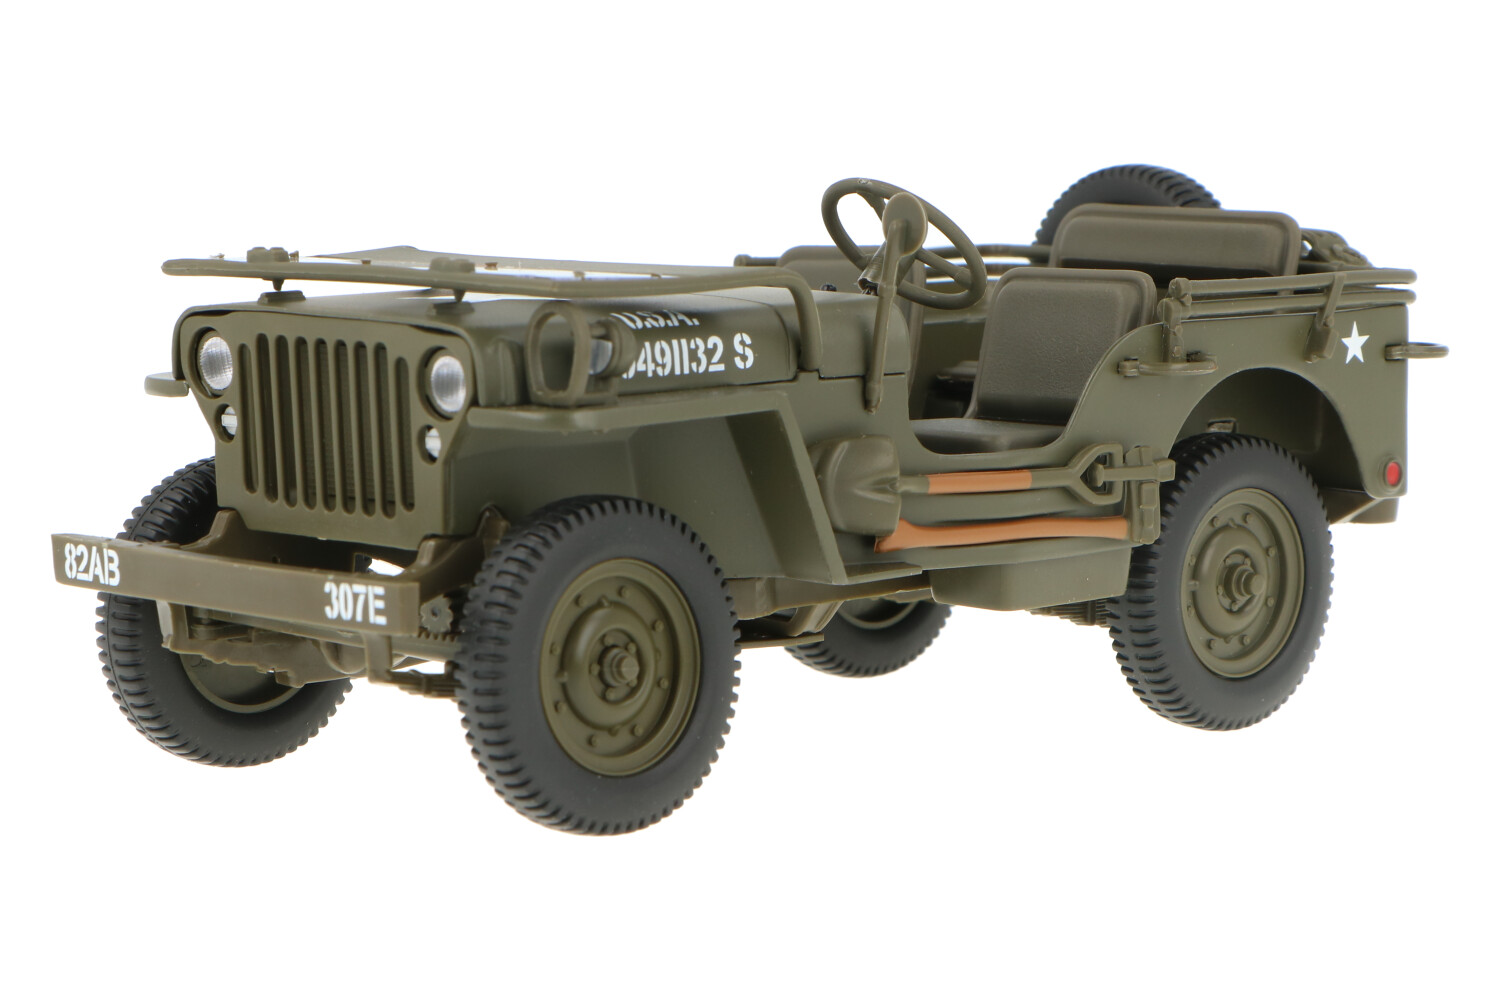 Willy's-Jeep-24001_1315637875240011Willy's-Jeep-24001_Houseofmodelcars_.jpg